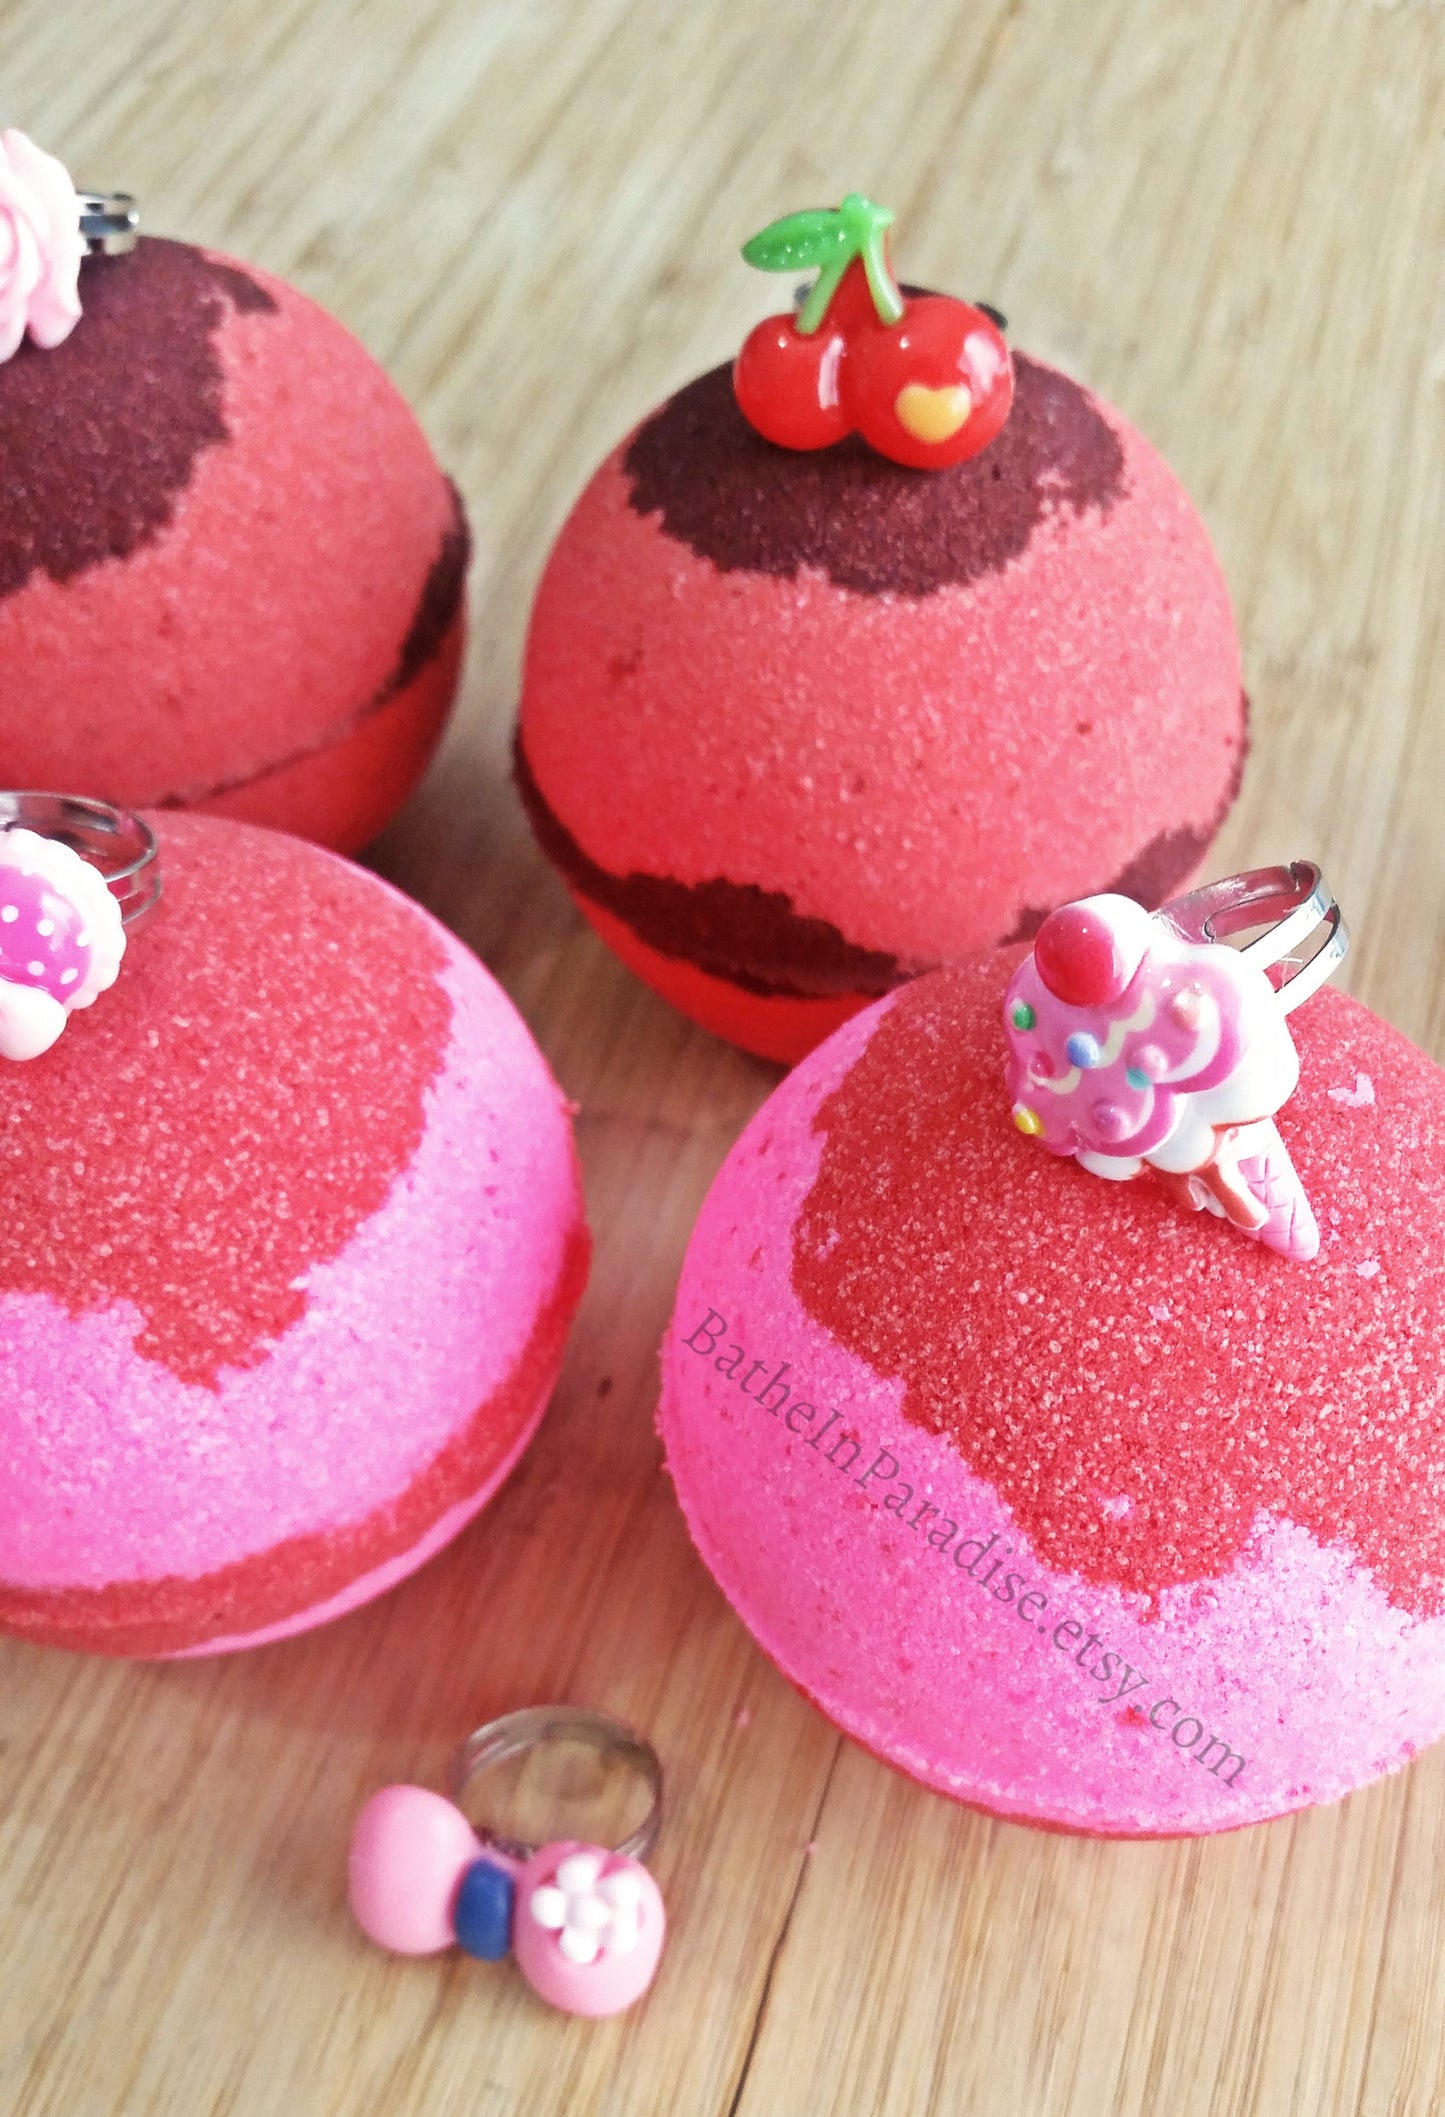 Ring Bath Bomb (1) | Children's Size Ring | Surprise Toy Ring Inside Fizzy | Cherry Scent